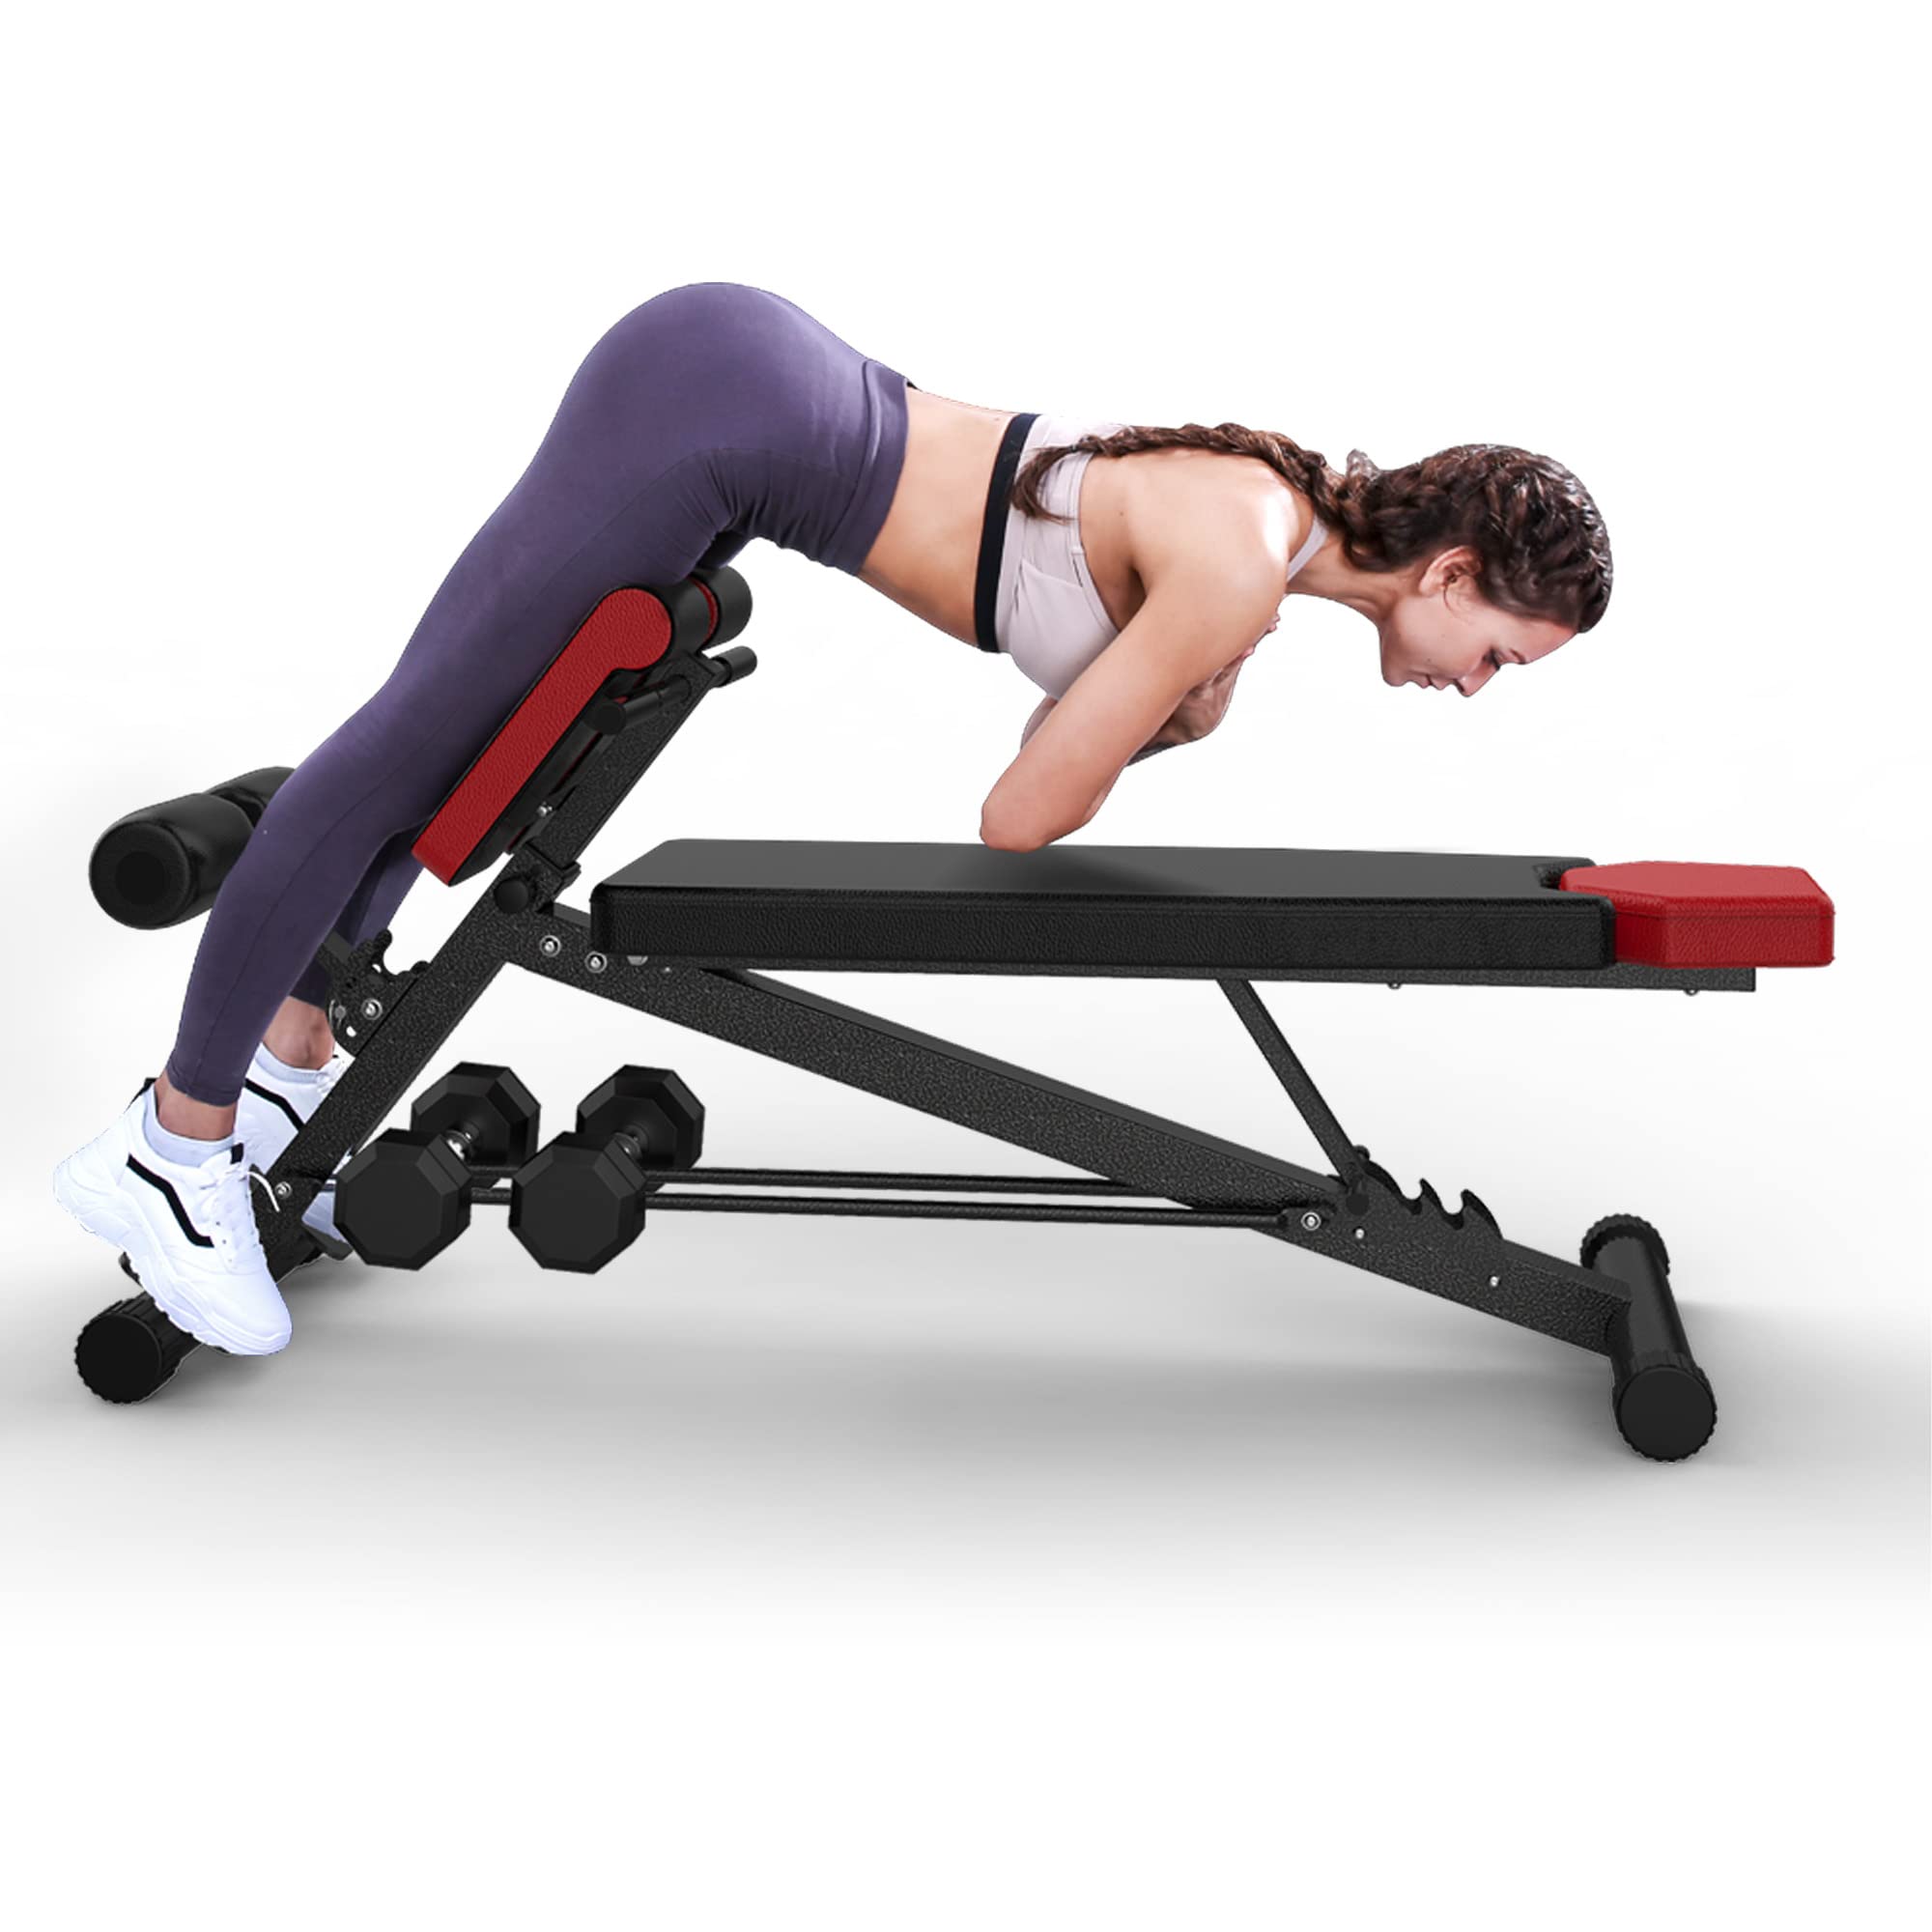 FF Finer Form FINER FORM Multi-Functional Adjustable Weight Bench for Total Body Workout - Hyper Back Extension, Roman chair, Adjustable Ab Si